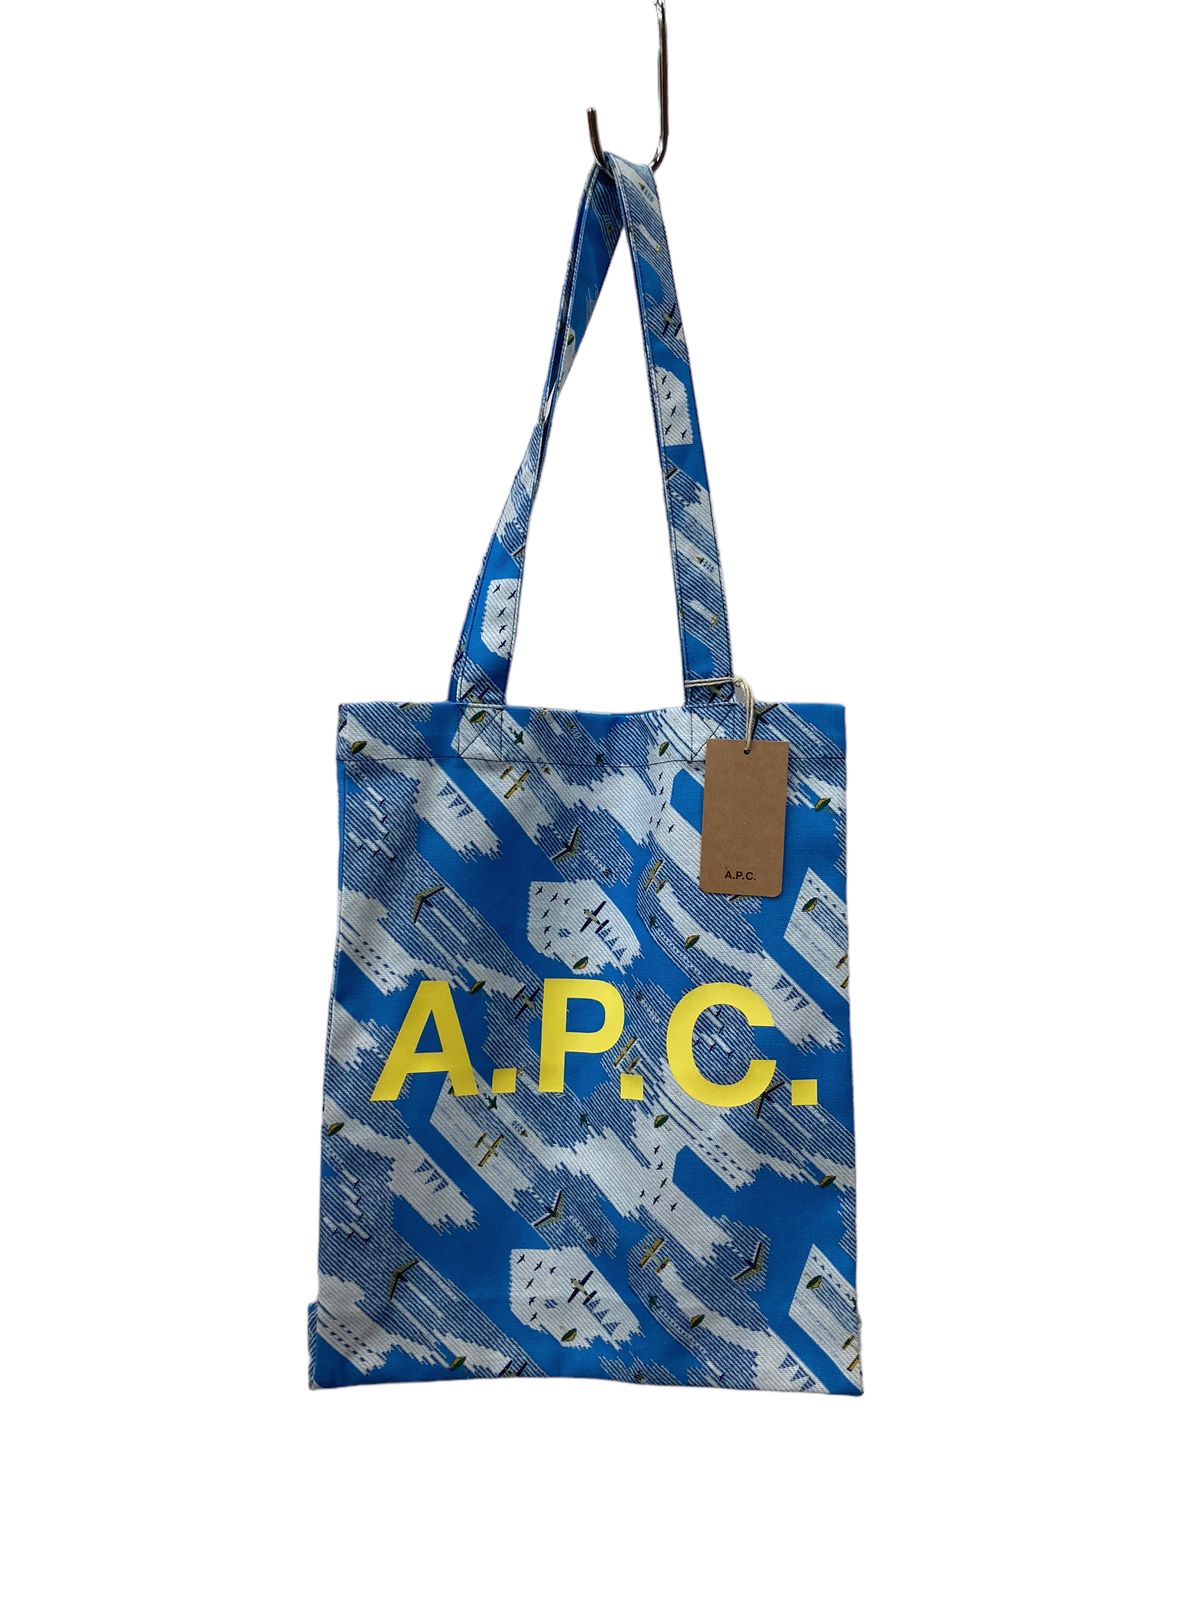 A.P.C. (アーペーセー) トートバッグ 総柄 Tote Lou BLEU COFBY M61442 